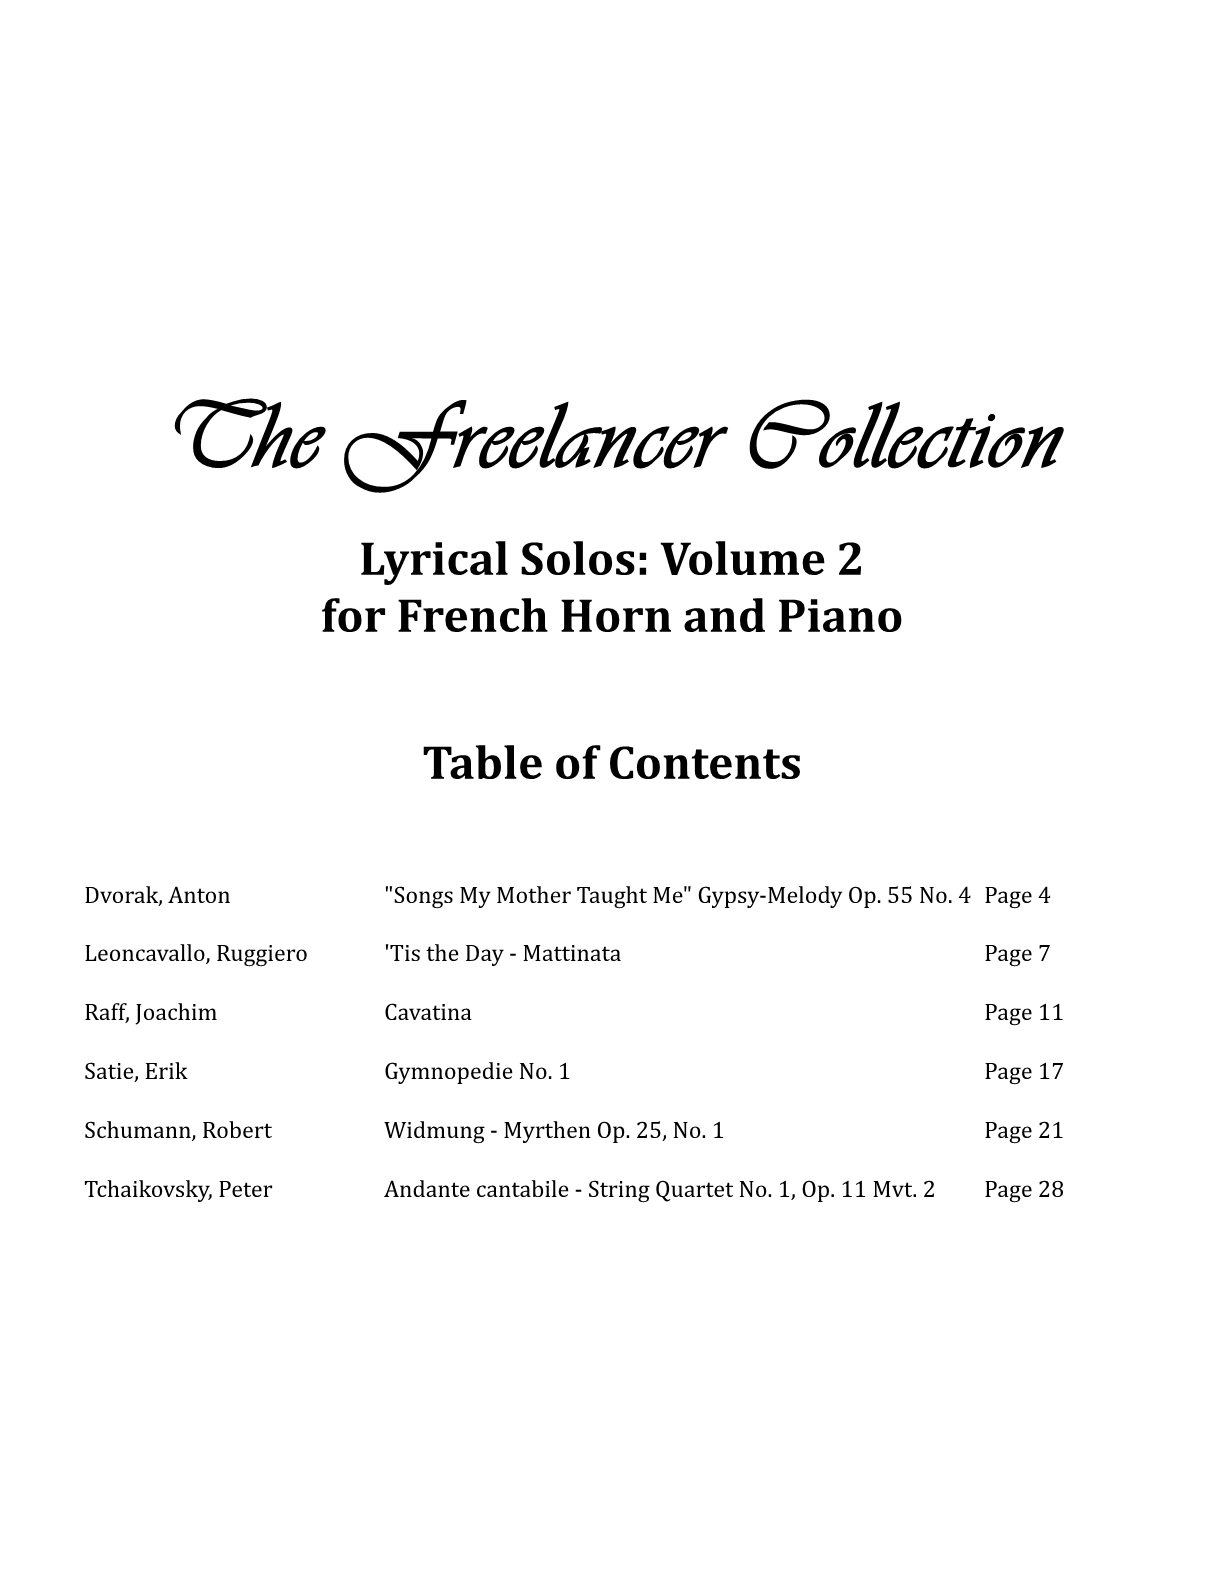 Hepler - Freelancer Collection Lyrical Solos Vol 2 (Trp & Piano) - Click Image to Close